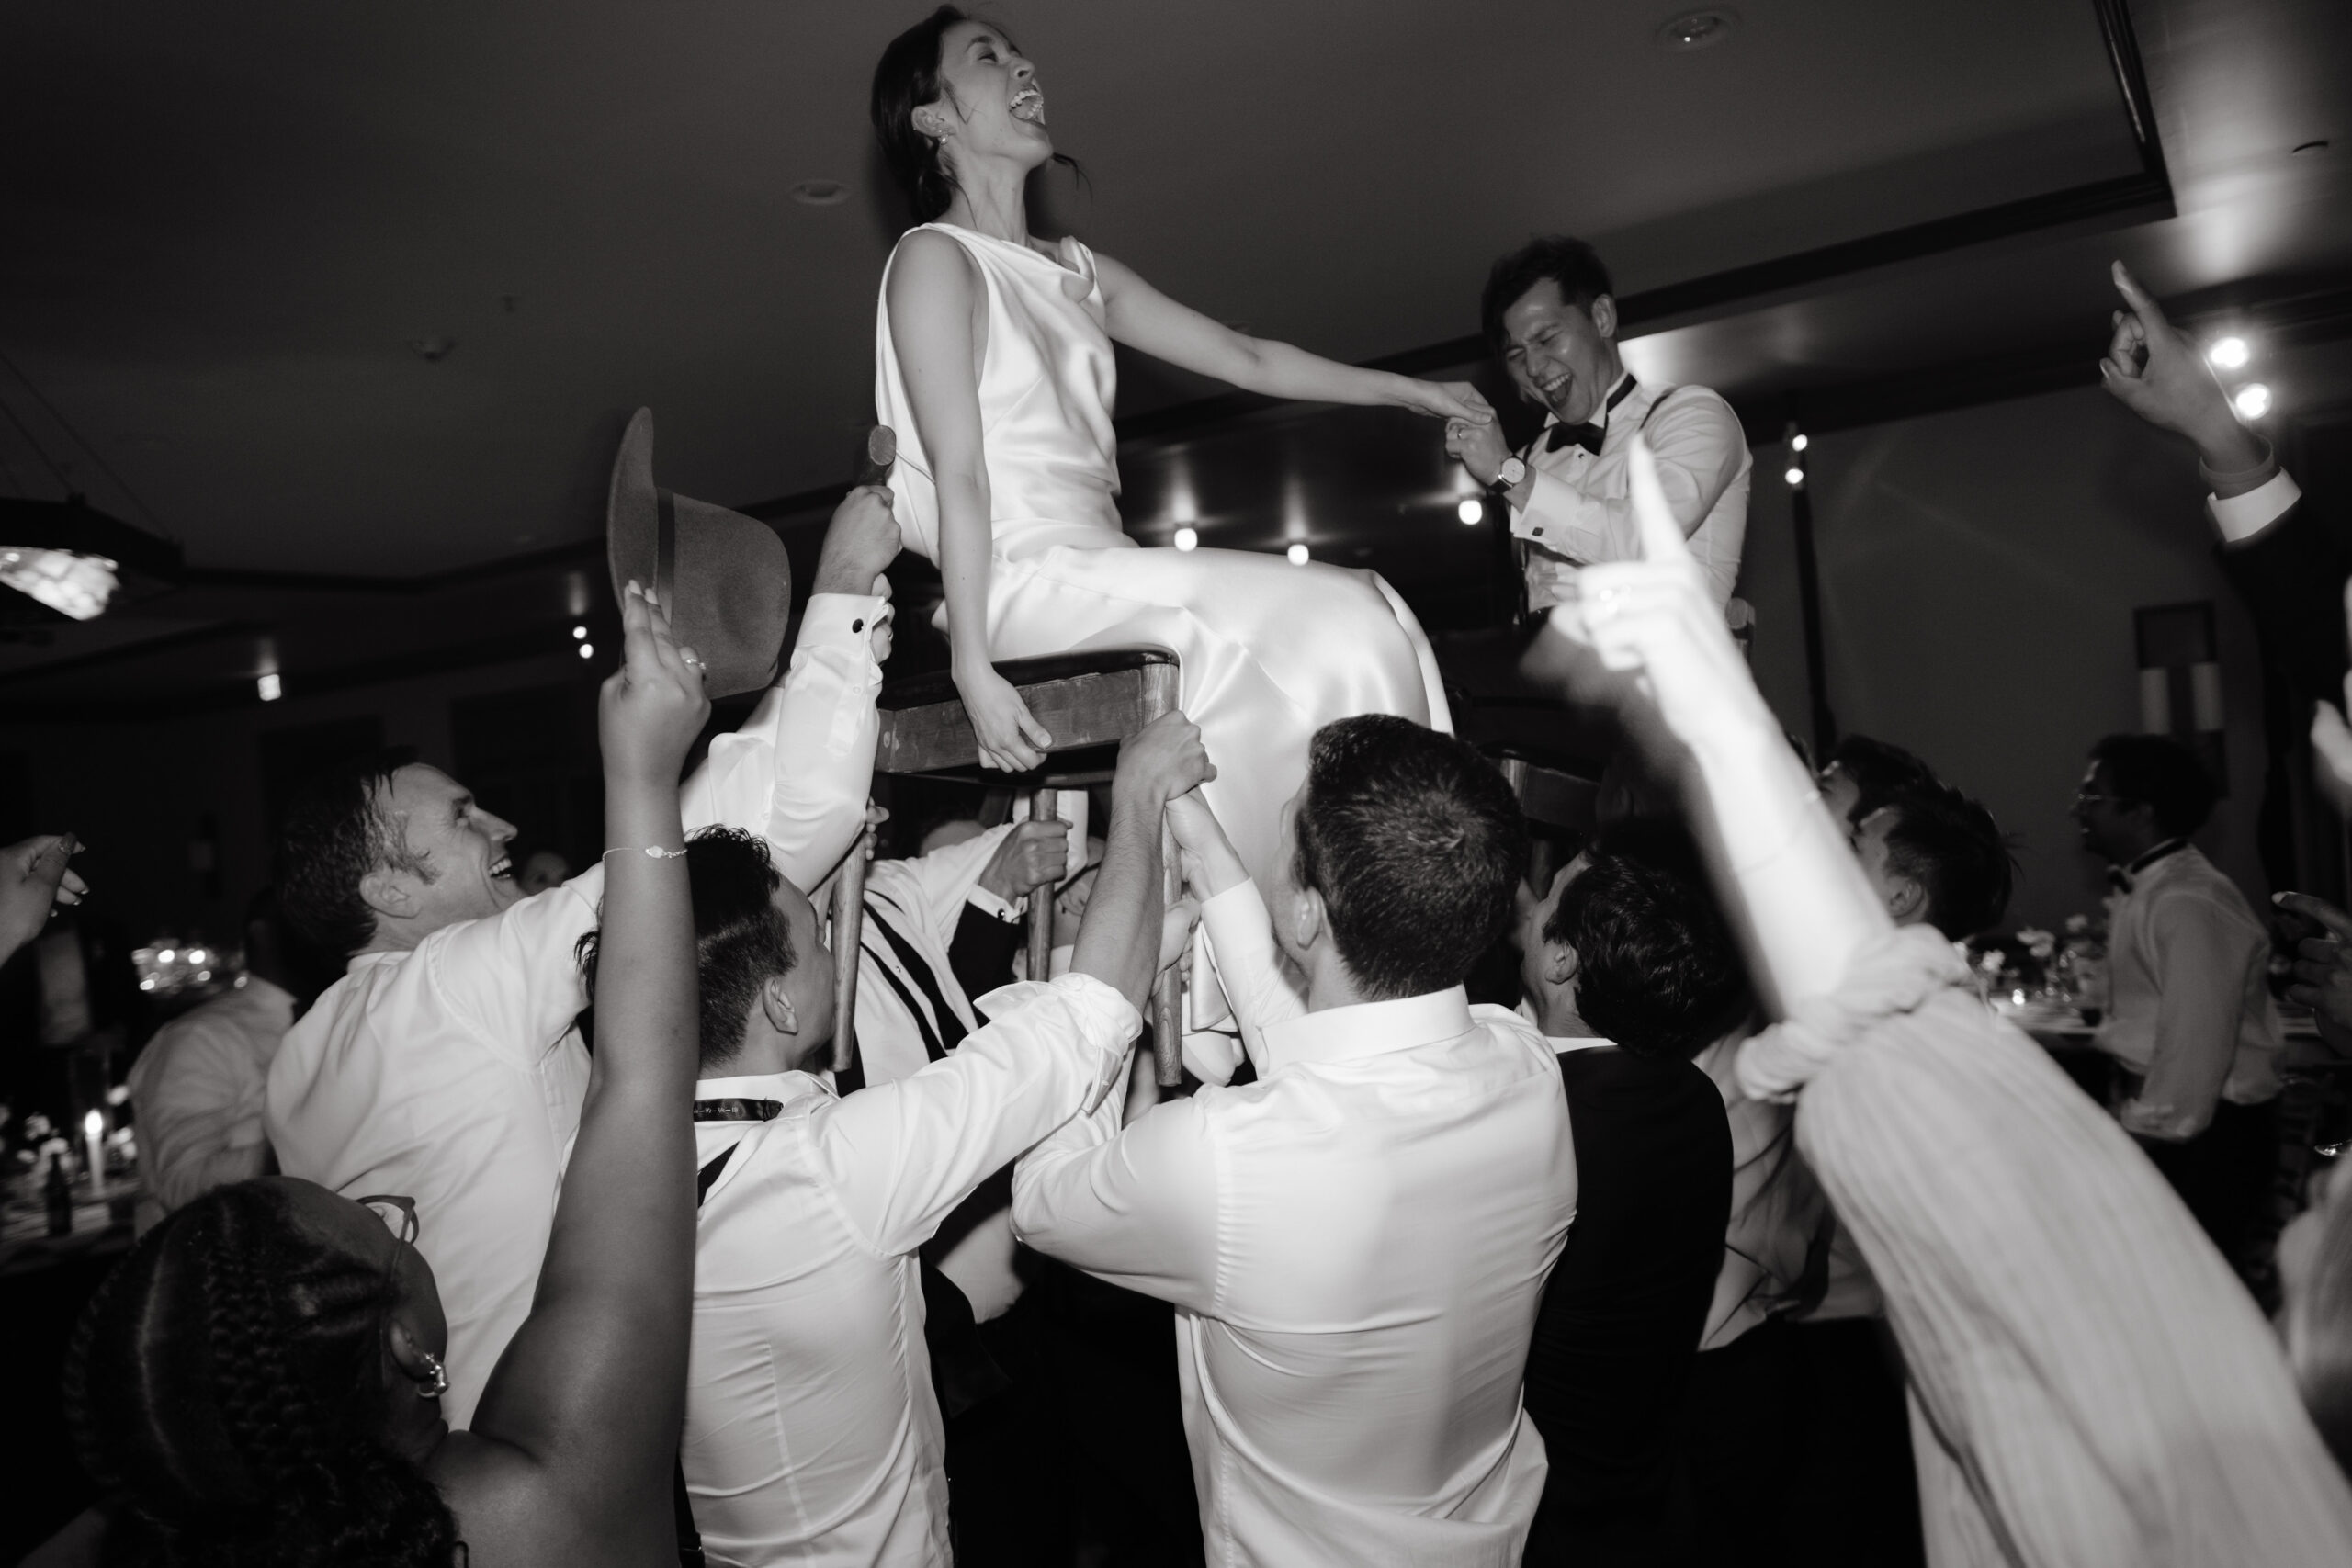 The bride and groom are exhilarated, sitting on a chair while being carried high up in the air. Image by Jenny Fu Studio